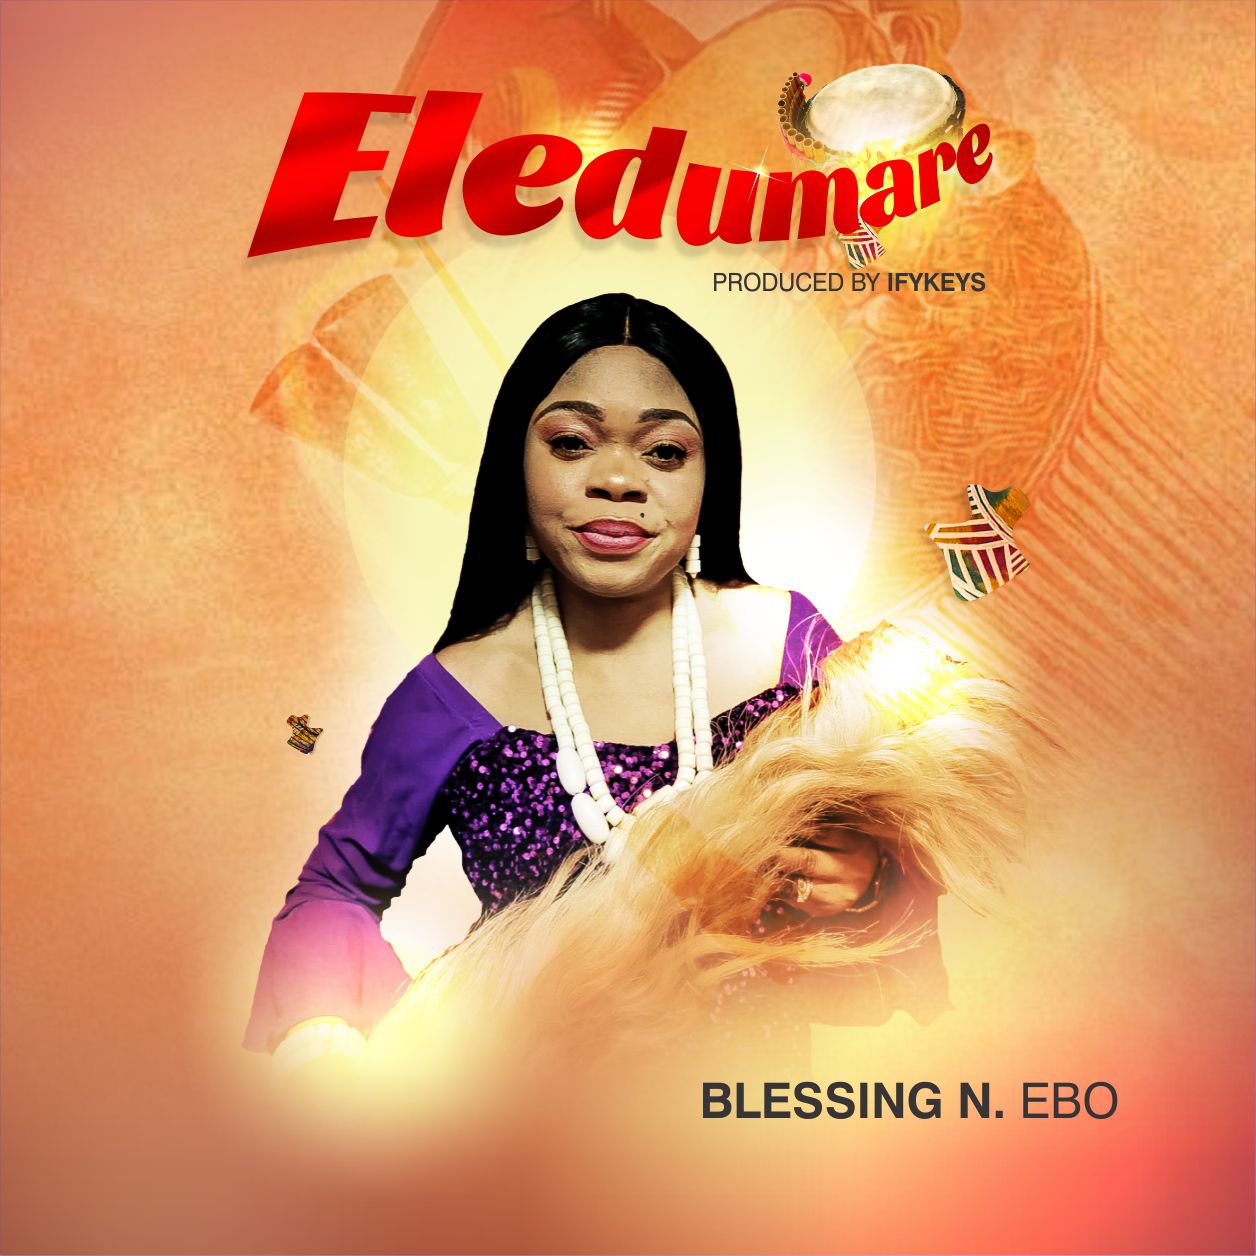 Download Mp3: Blessing N. Ebo - Eledumare